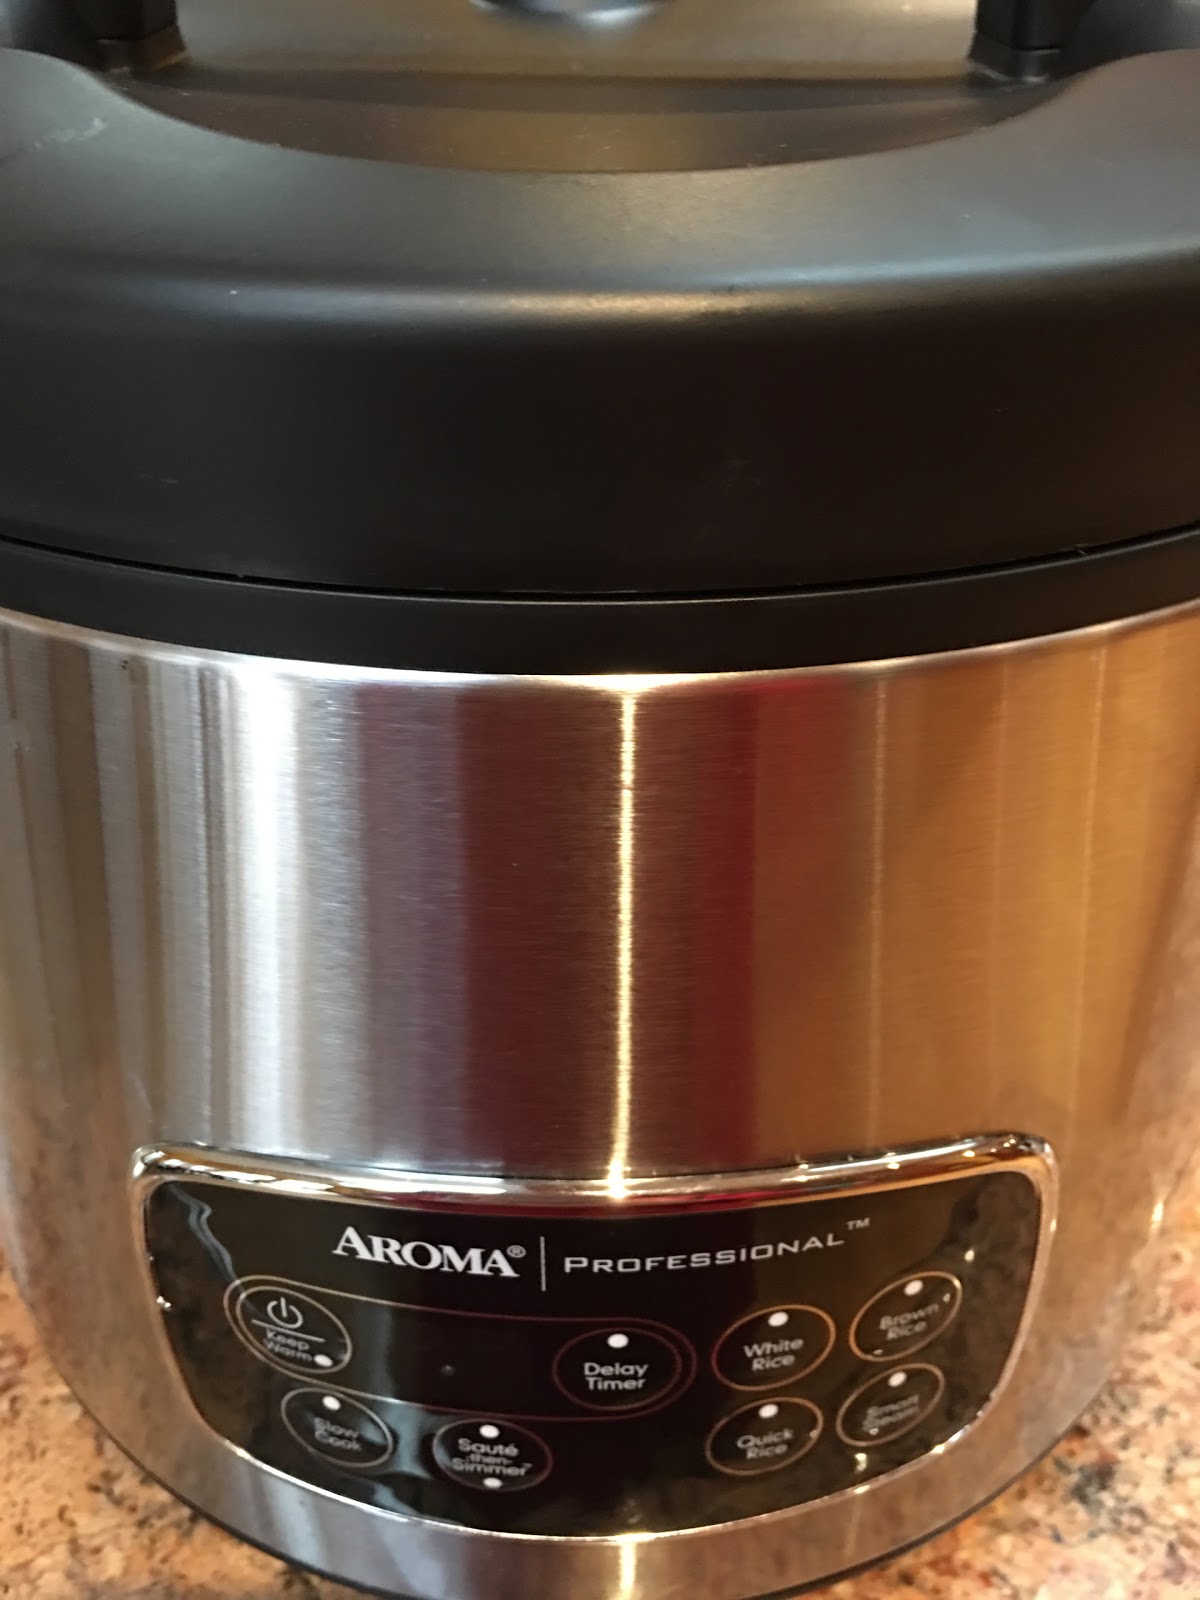 The Sasson Report: Cheap Aroma rice cooker has me eating my words